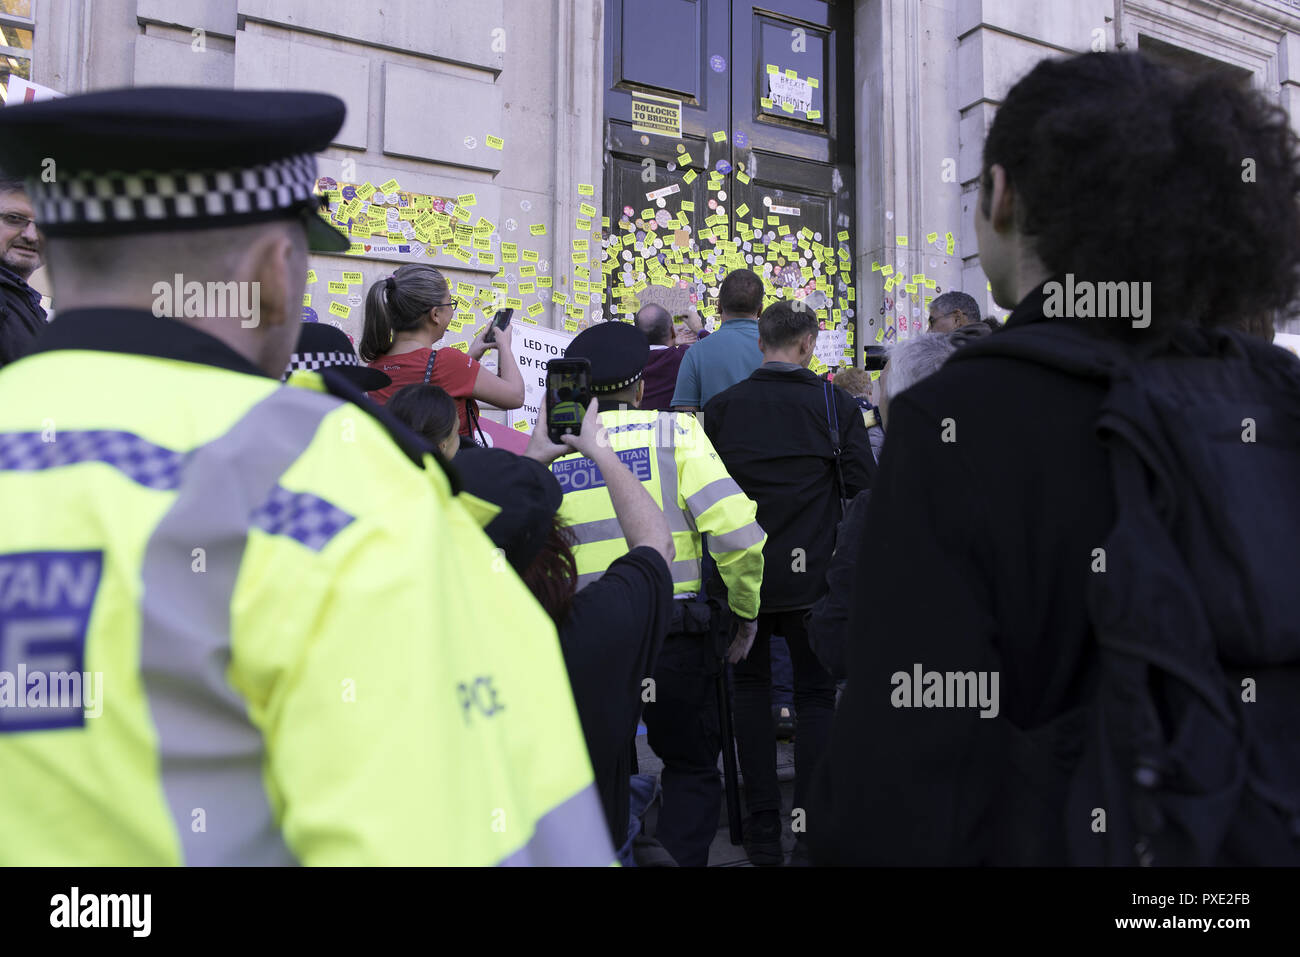 London, Greater London, UK. 20th Oct, 2018. Police officers are seen walking to the Cabinet office building entrance to prevent anti-Brexit protesters from continuing to stick their stickers around the entrance during the march.A huge demonstration organised by the People's vote campaign gathered at Park Lane to march to the Parliament Square to protest against the Tory government's Brexit negotiations and demanding for a second vote on the final Brexit deal. Credit: Andres Pantoja/SOPA Images/ZUMA Wire/Alamy Live News Stock Photo